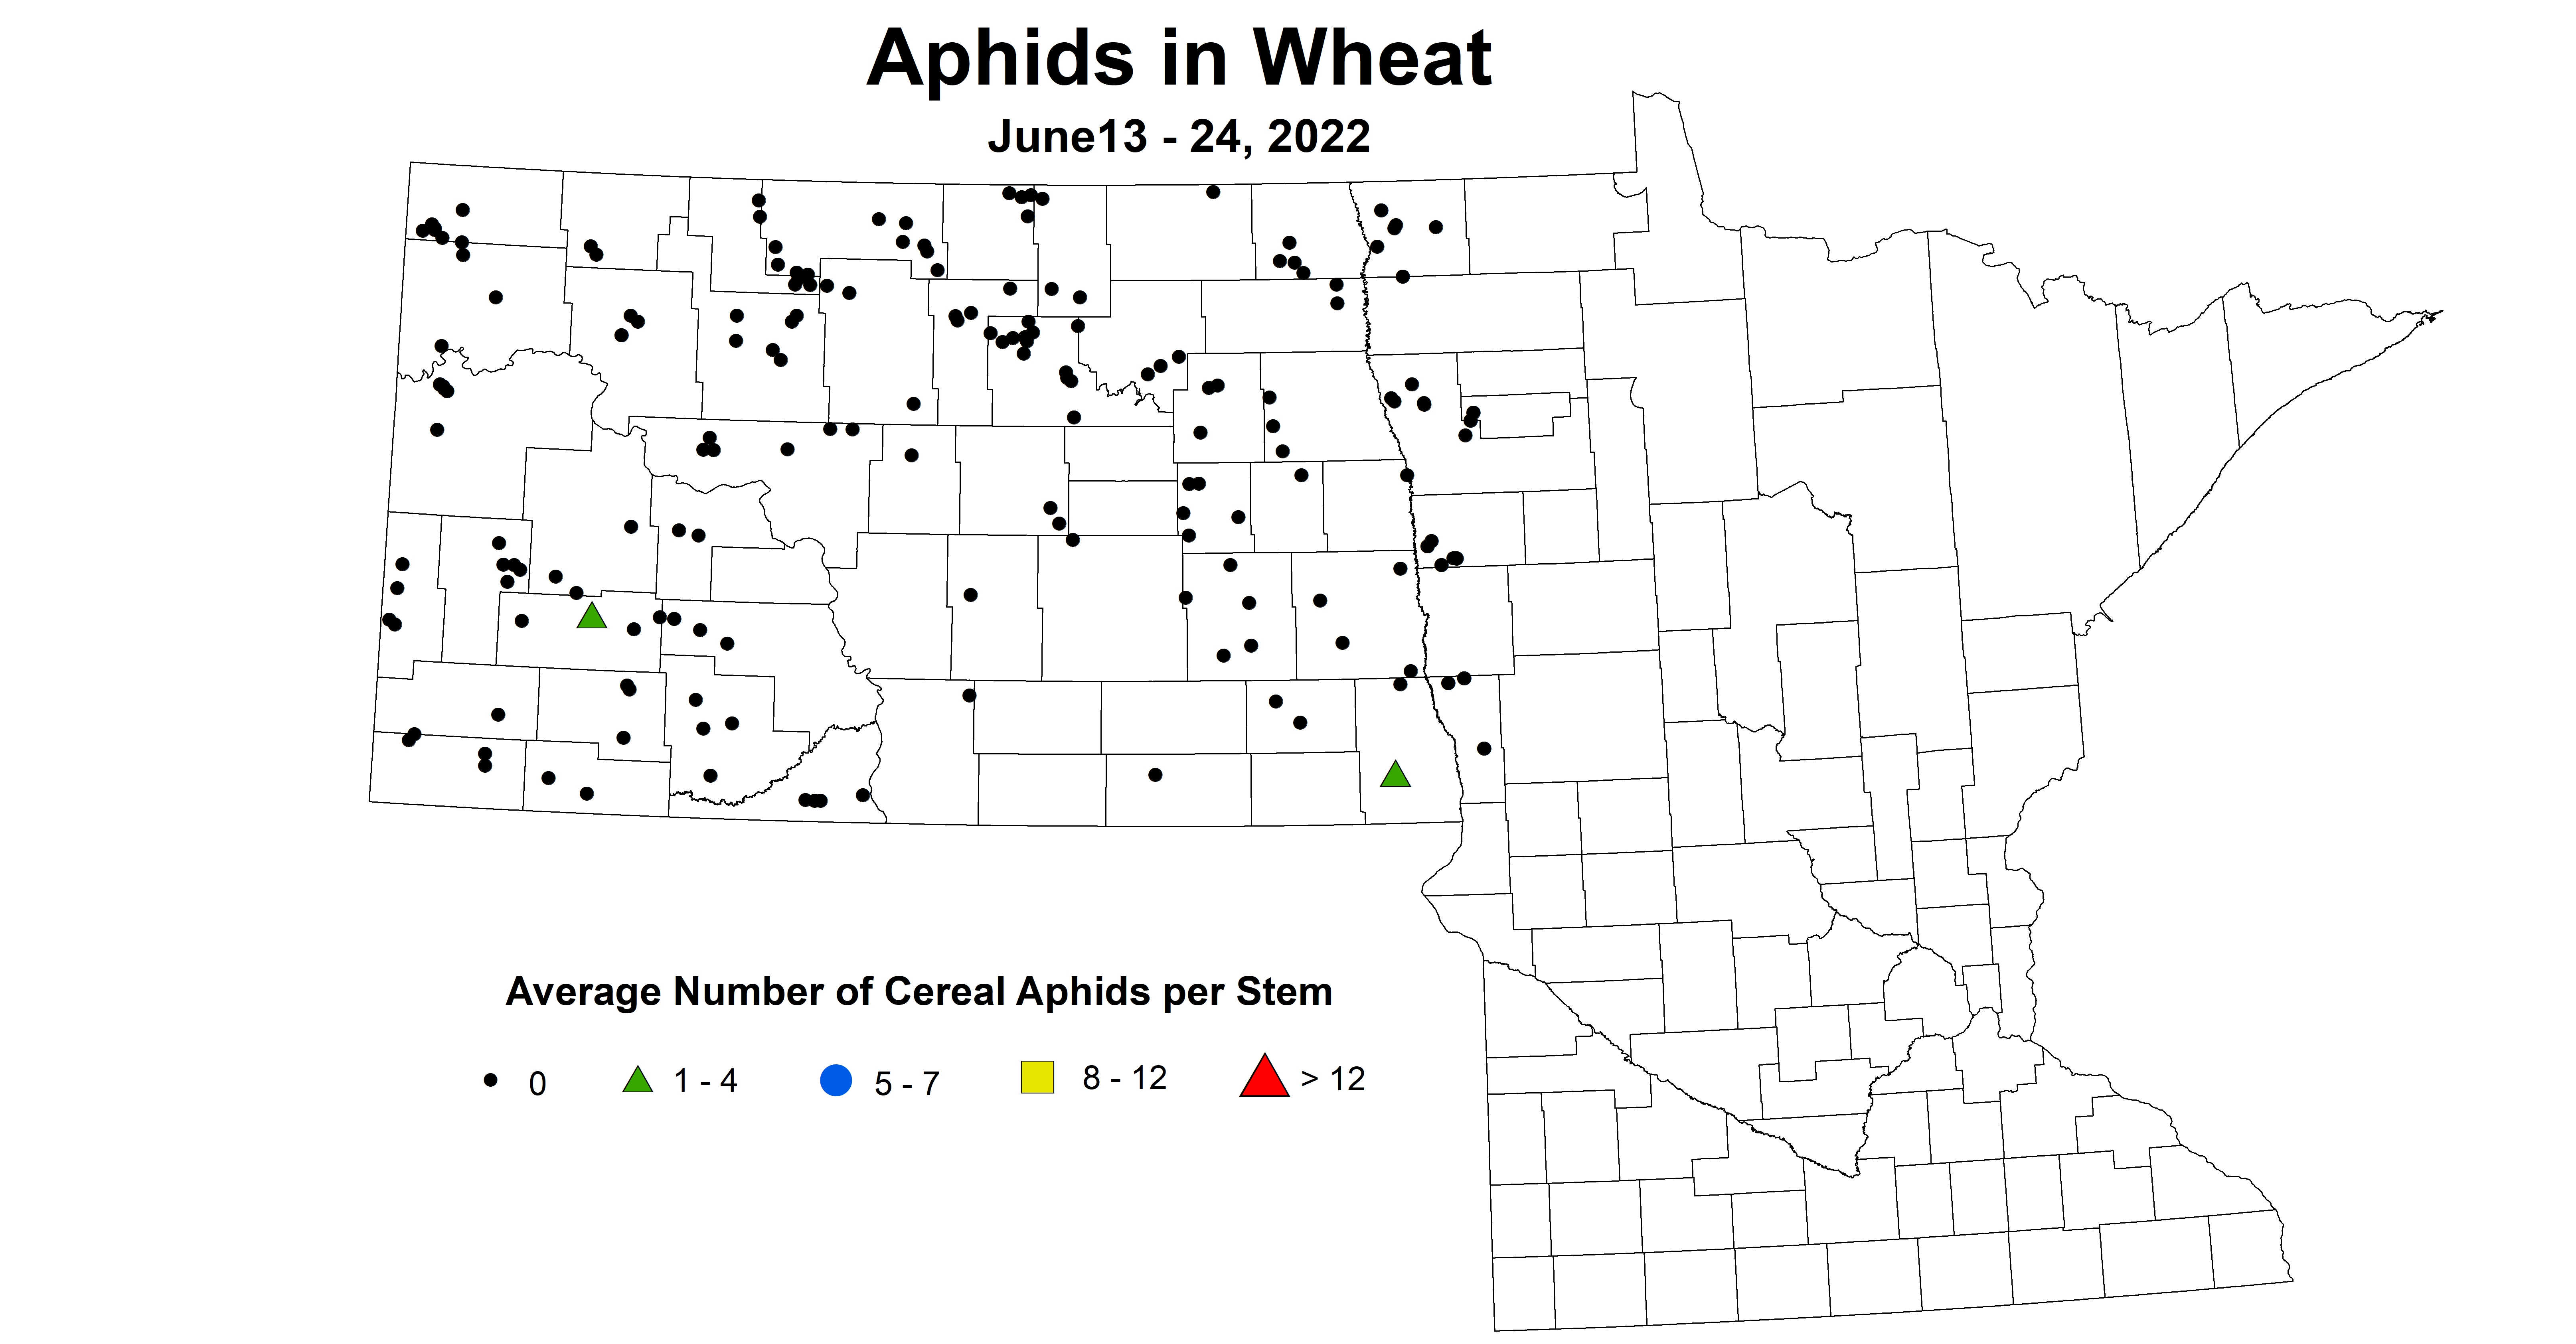 ND IPM map of wheat aphids June 13-24, 2022